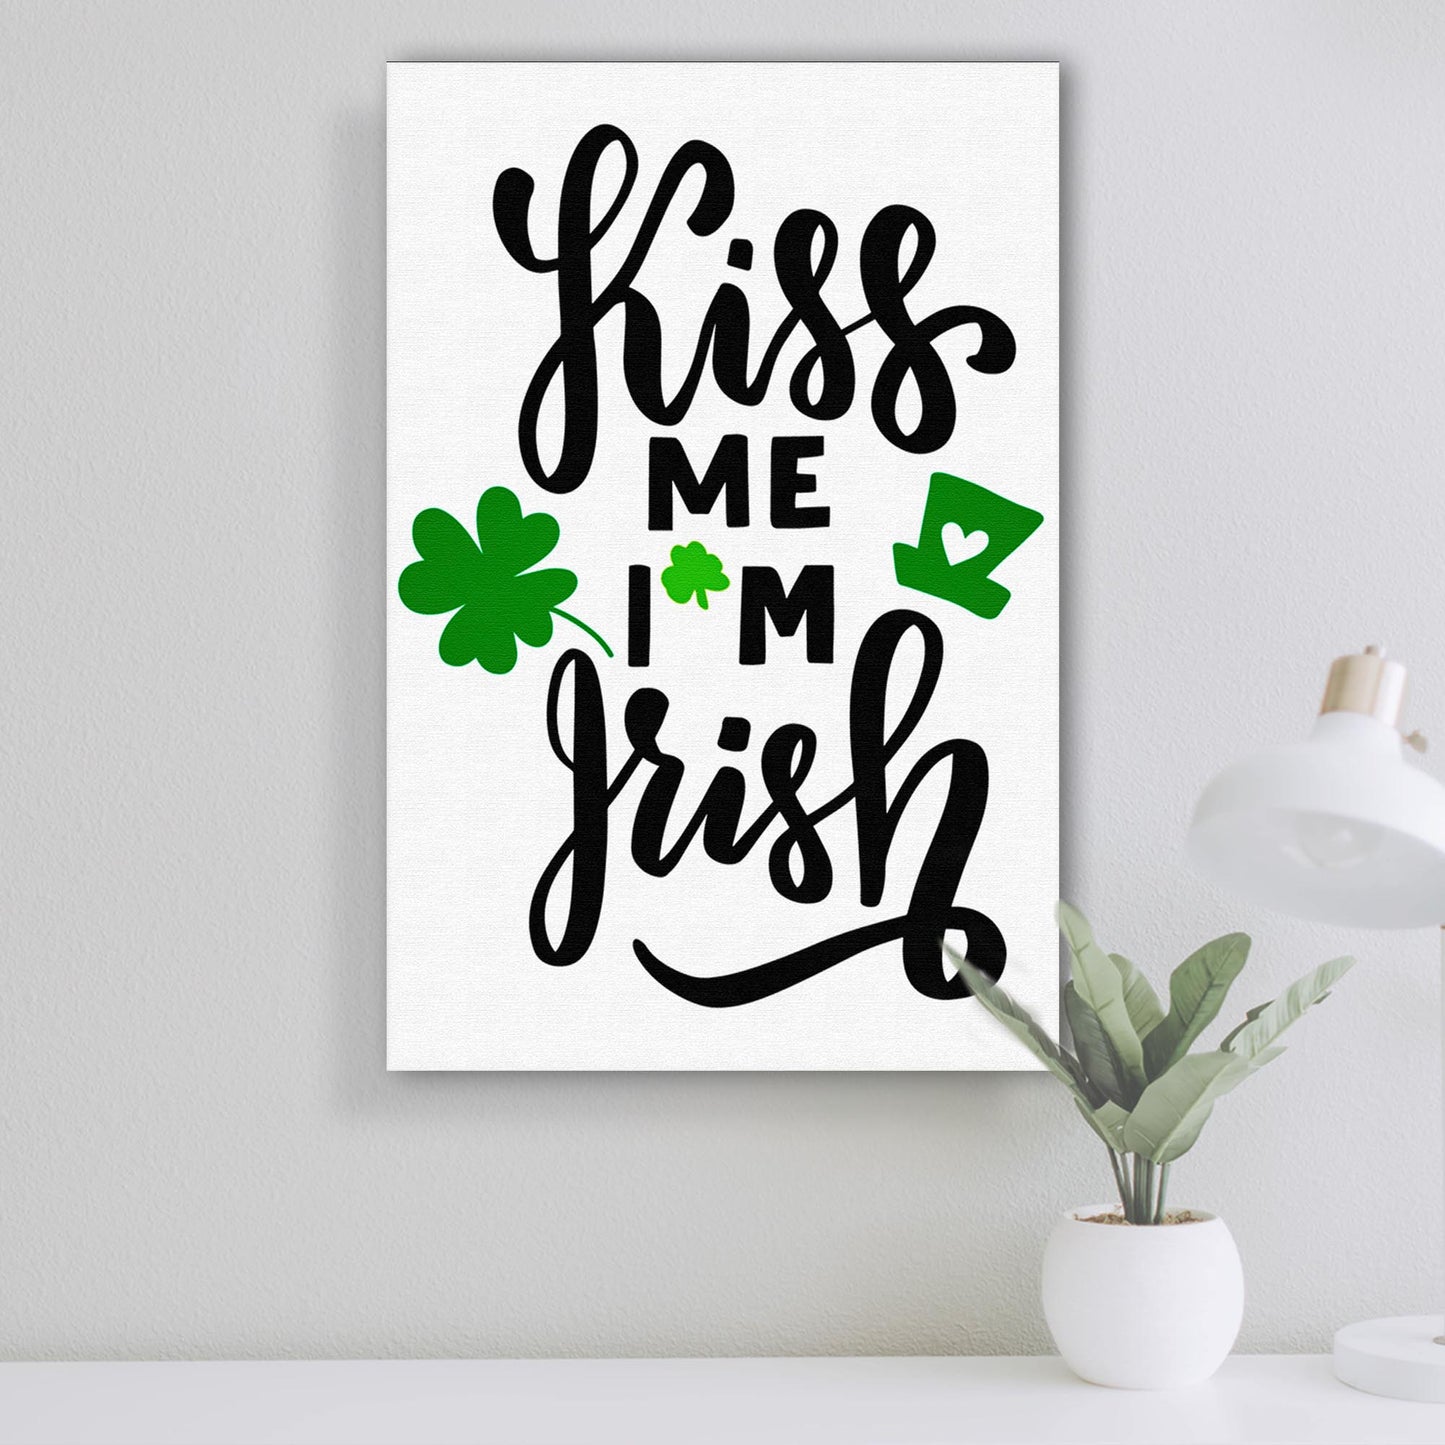 Kiss Me, I'm Irish Sign II  - Image by Tailored Canvases